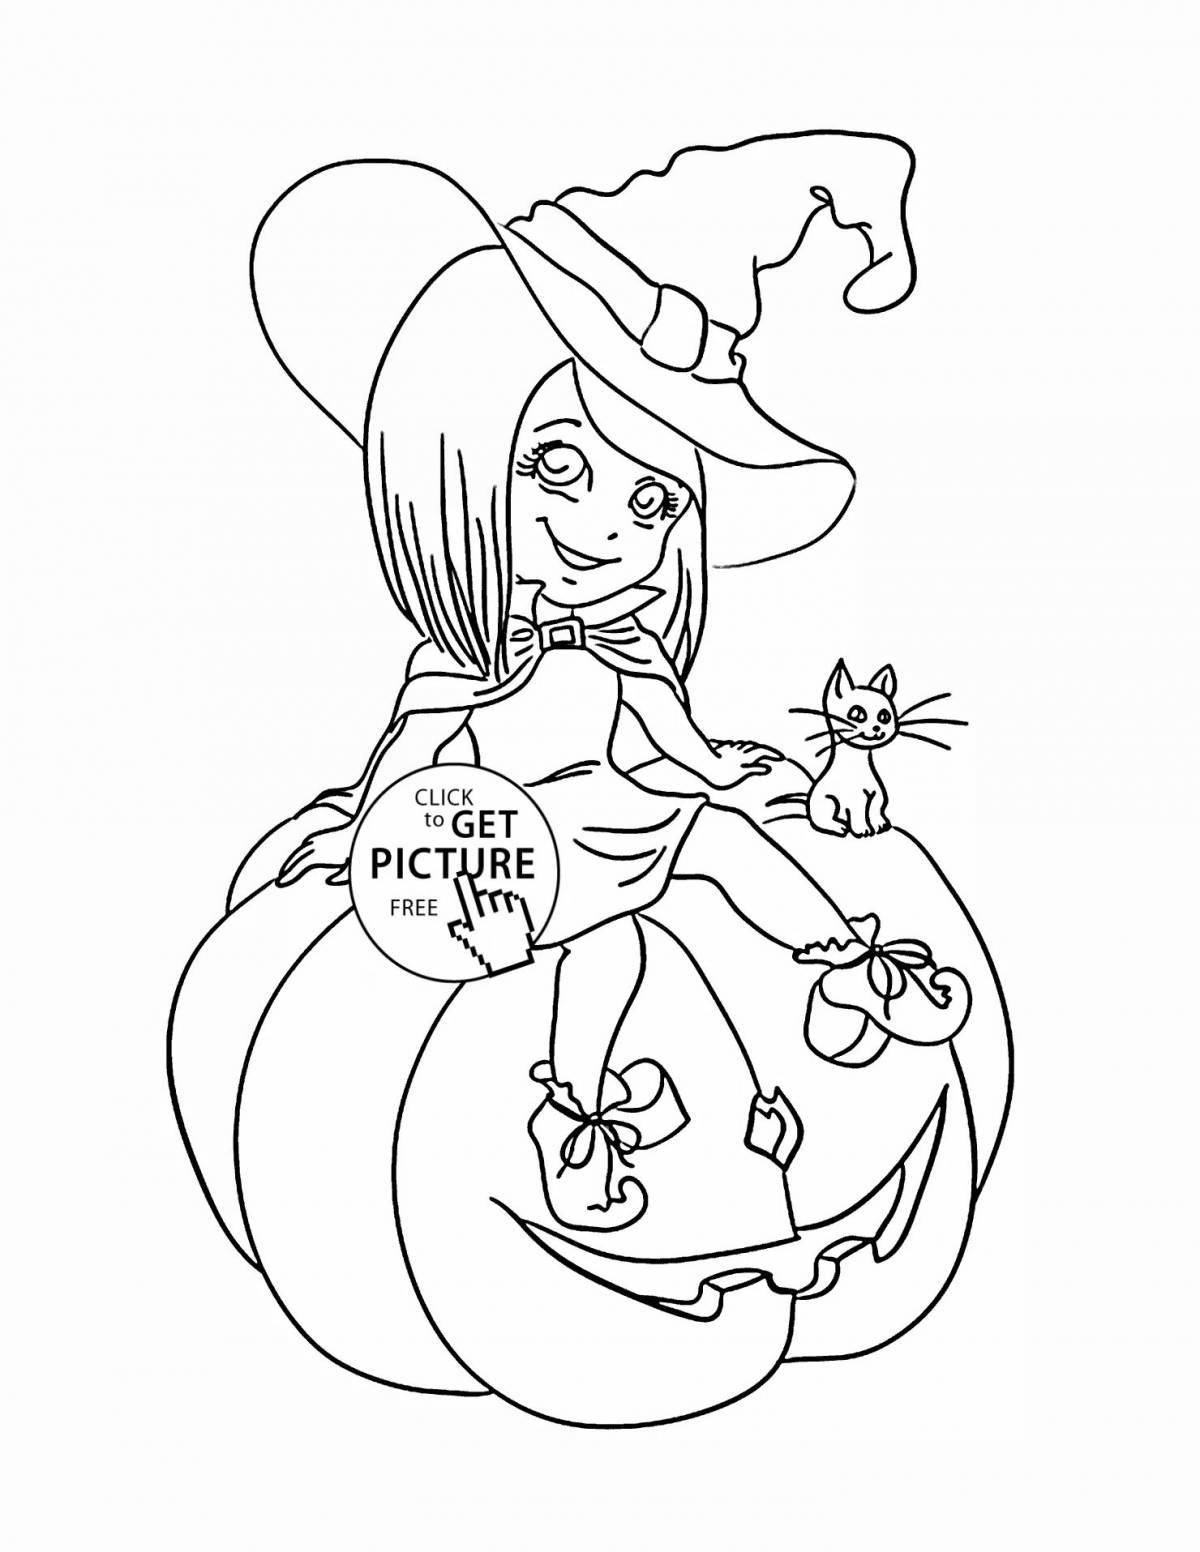 Fantastic halloween coloring book for girls